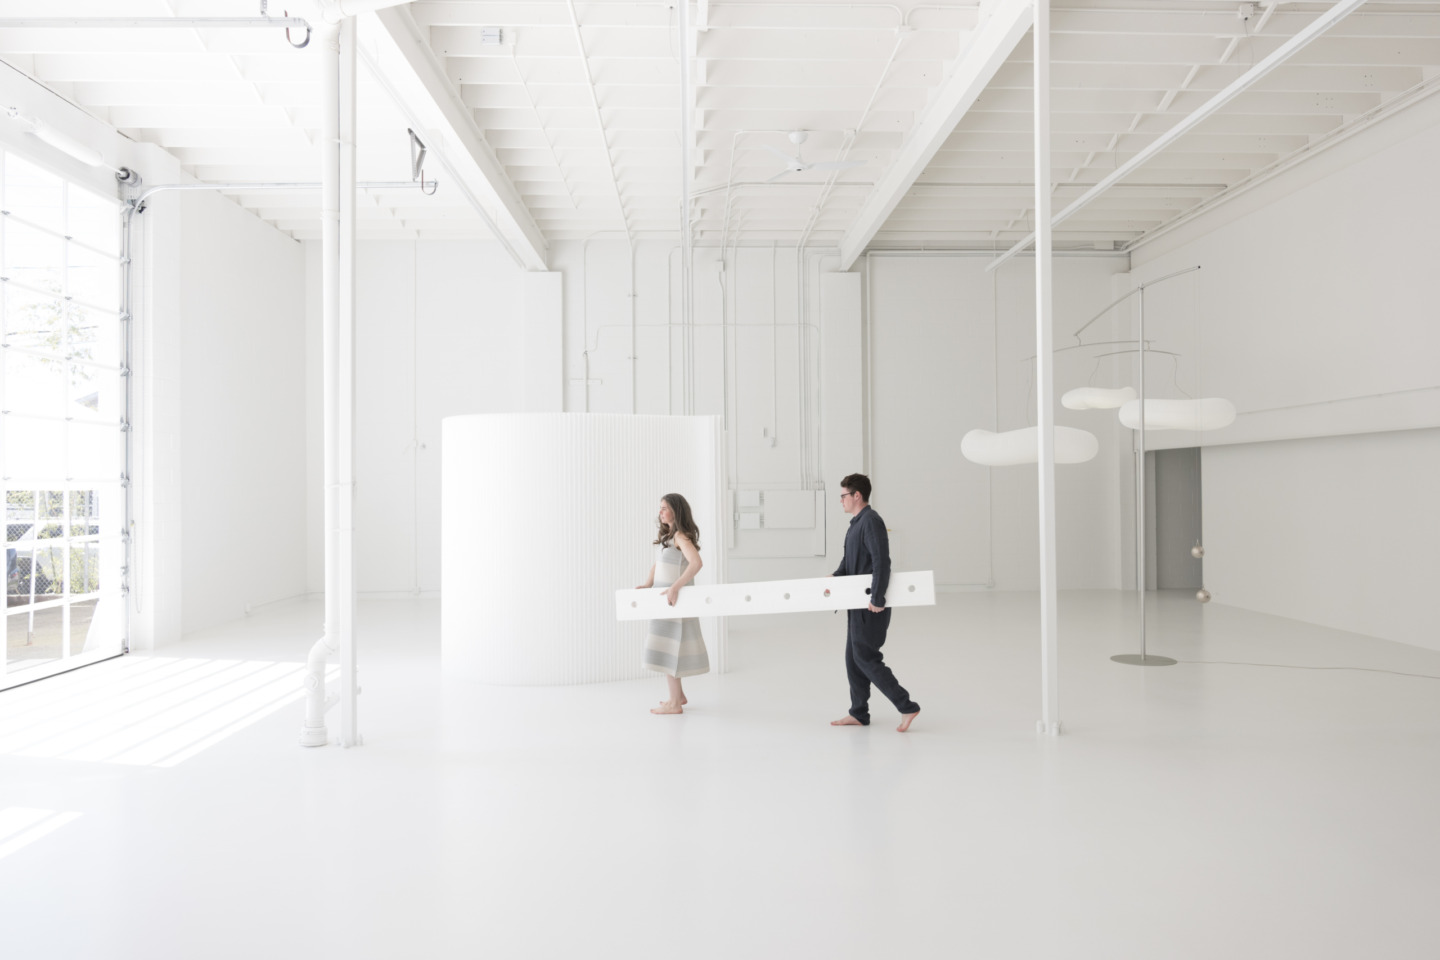 paper furniture including flexible walls and lighting elements.